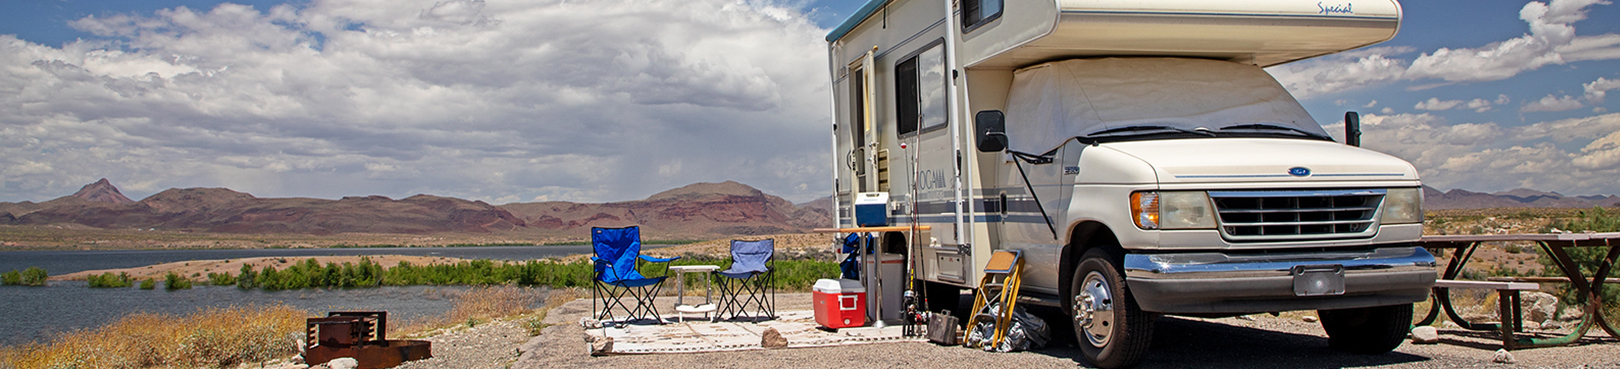 An RV campsite on a partly cloudy day overlooking Alamo Lake in the background.